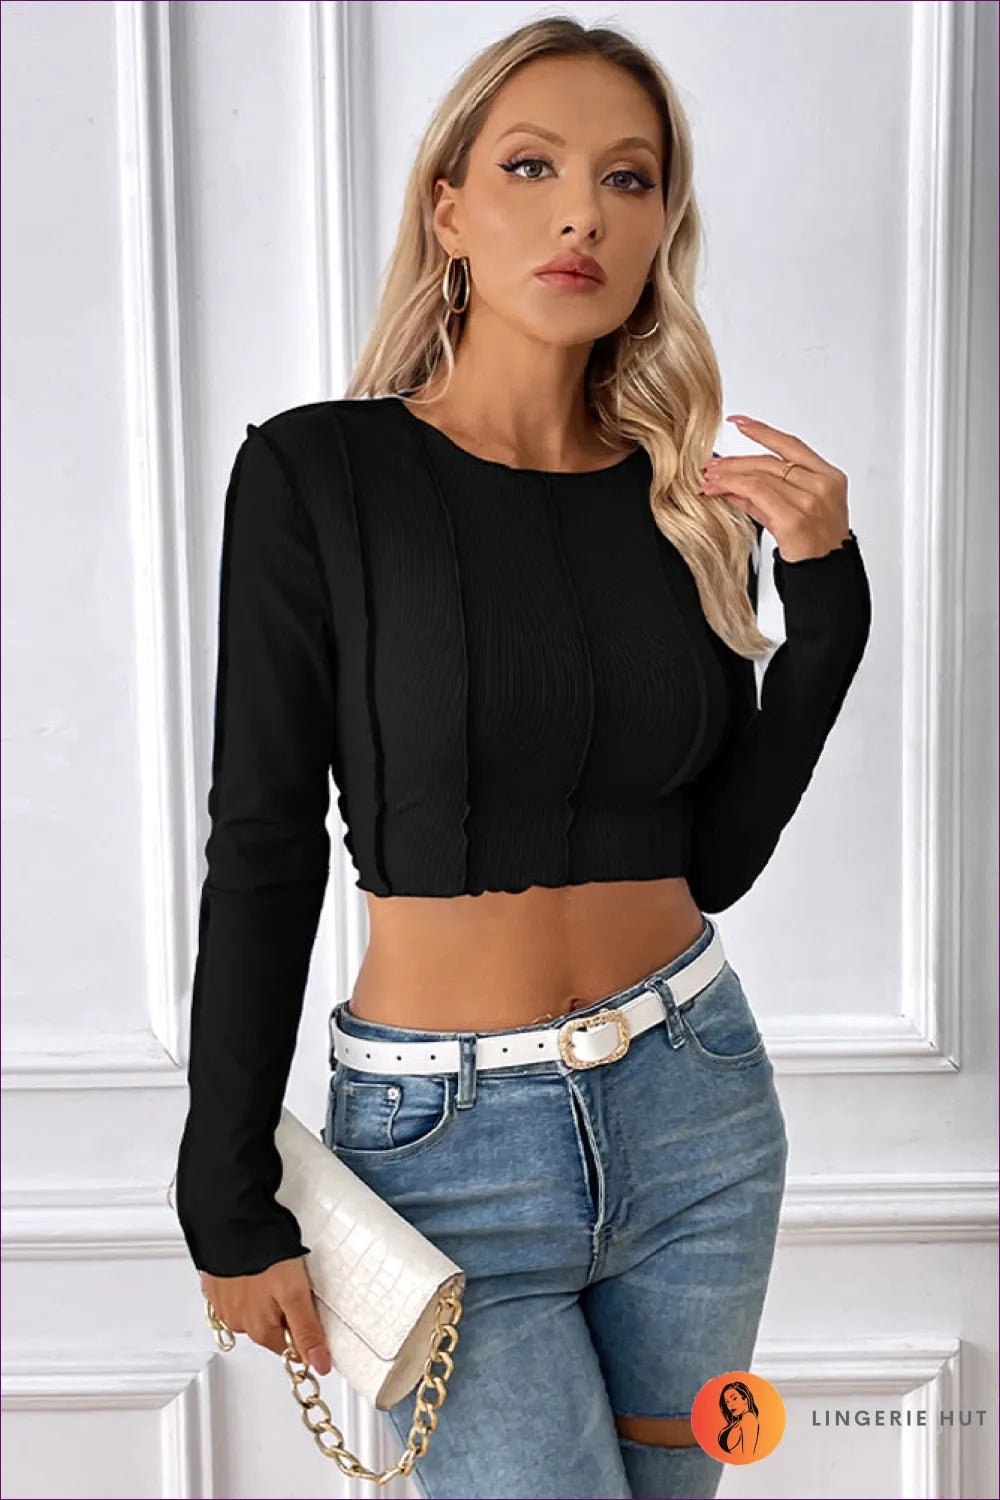 Embrace Your Allure In Our Sleek Ribbed Crop Top, Crafted With a Slim Fit And Cozy Jersey Fabric. Limited